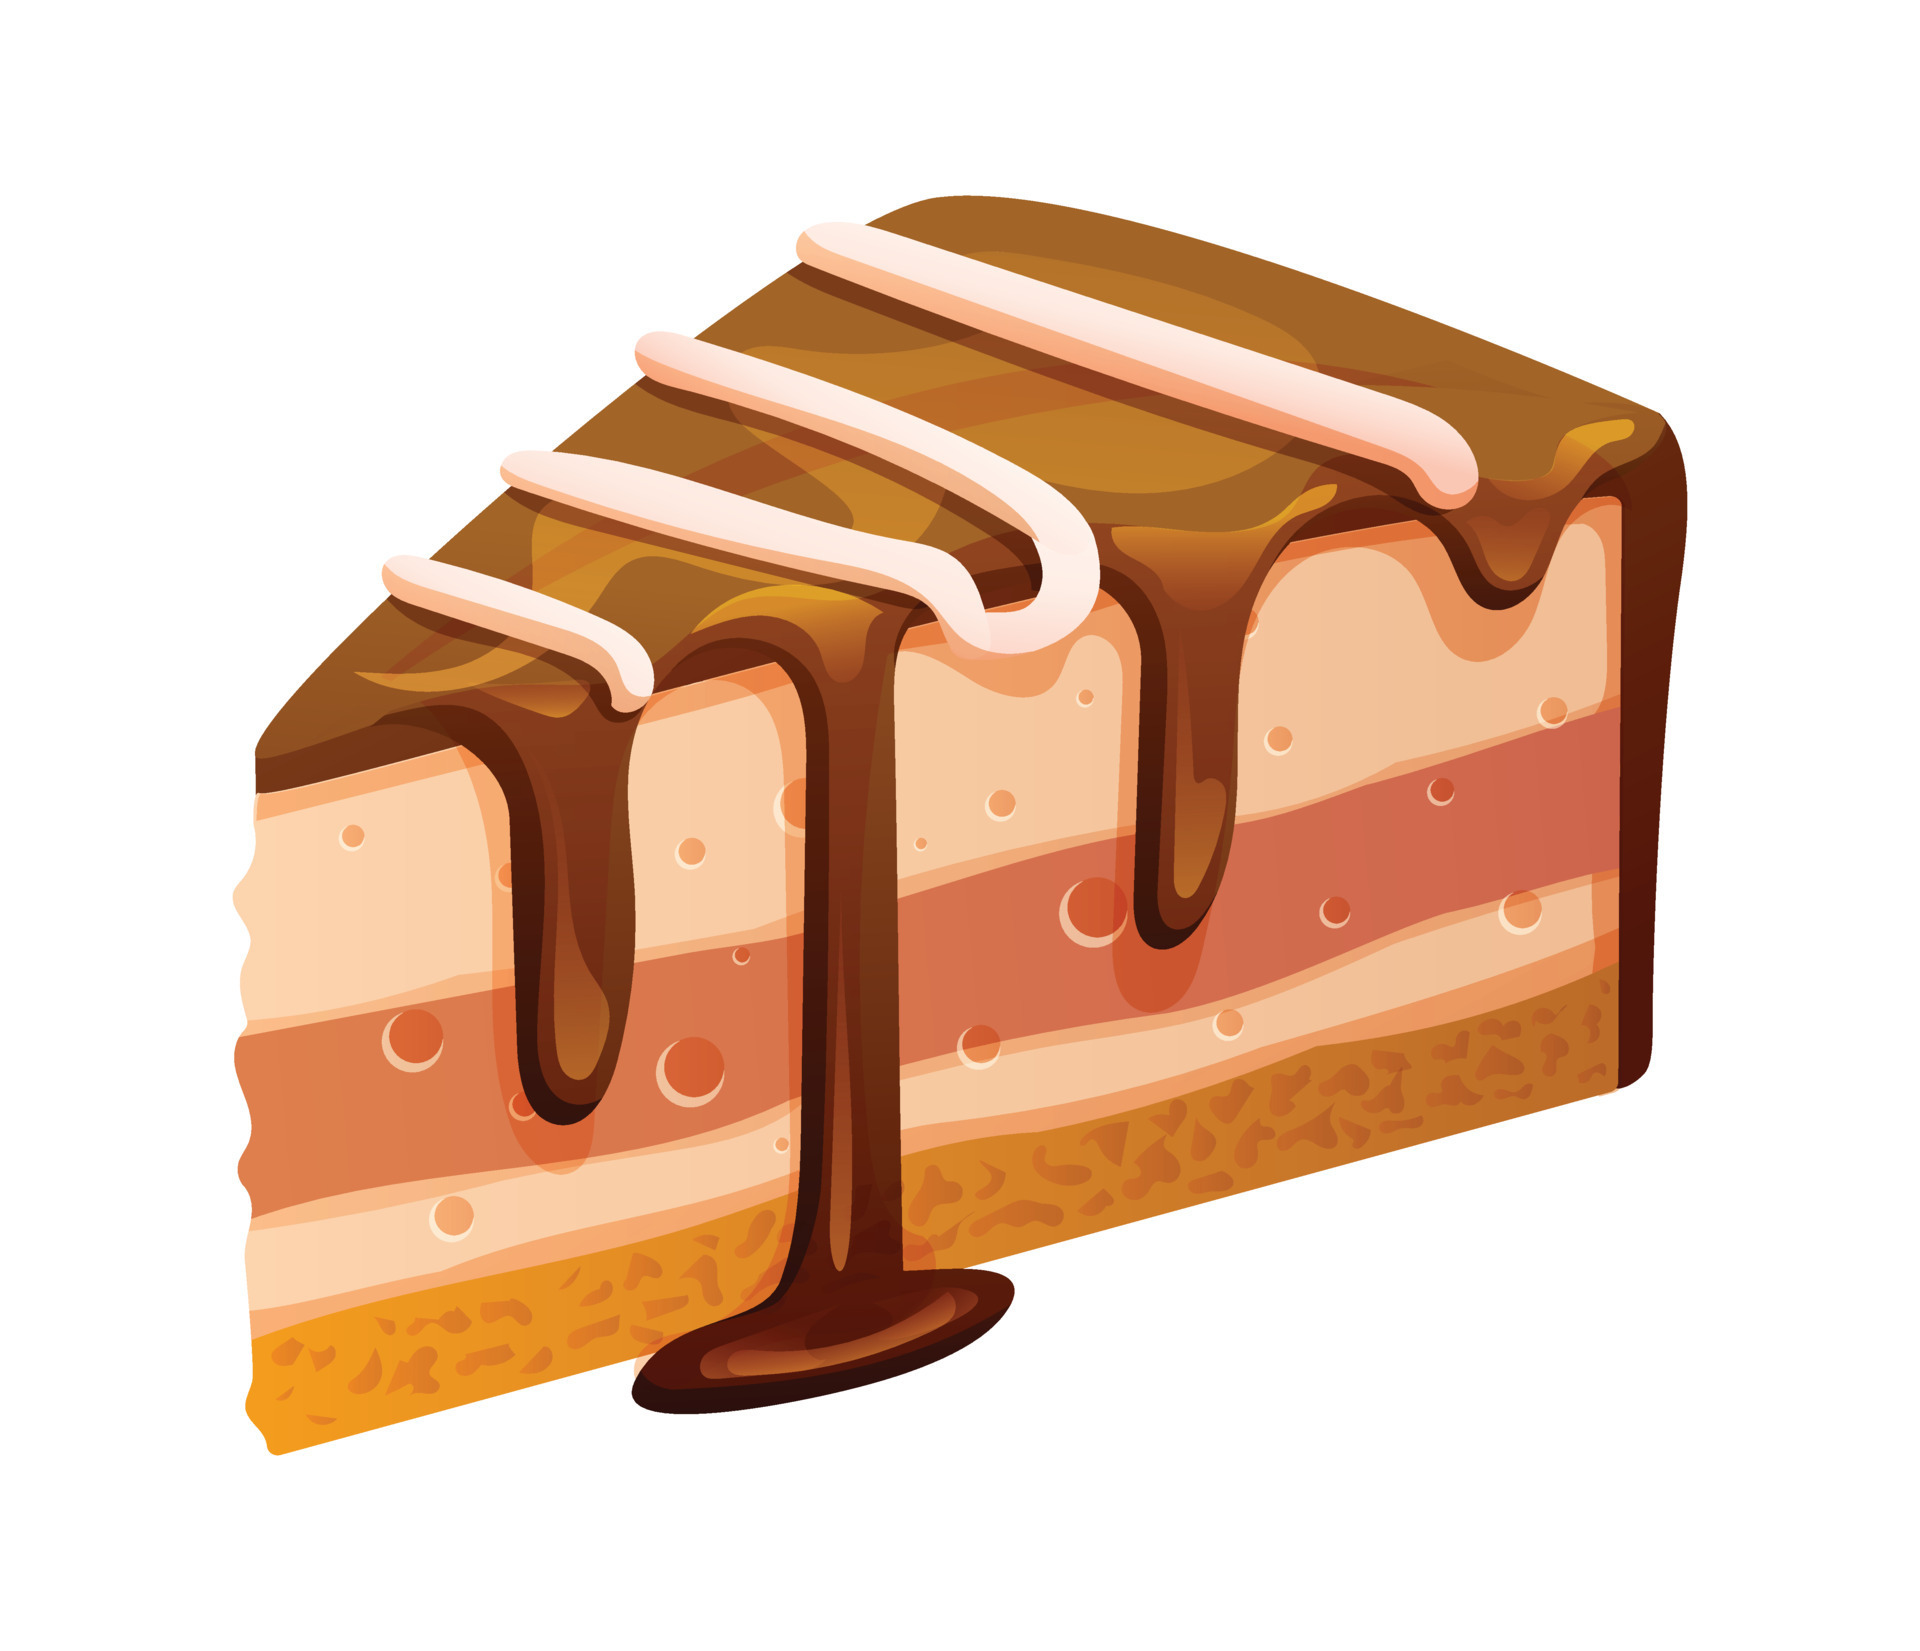 Cake Slice Illustration Images | Free Photos, PNG Stickers, Wallpapers &  Backgrounds - rawpixel